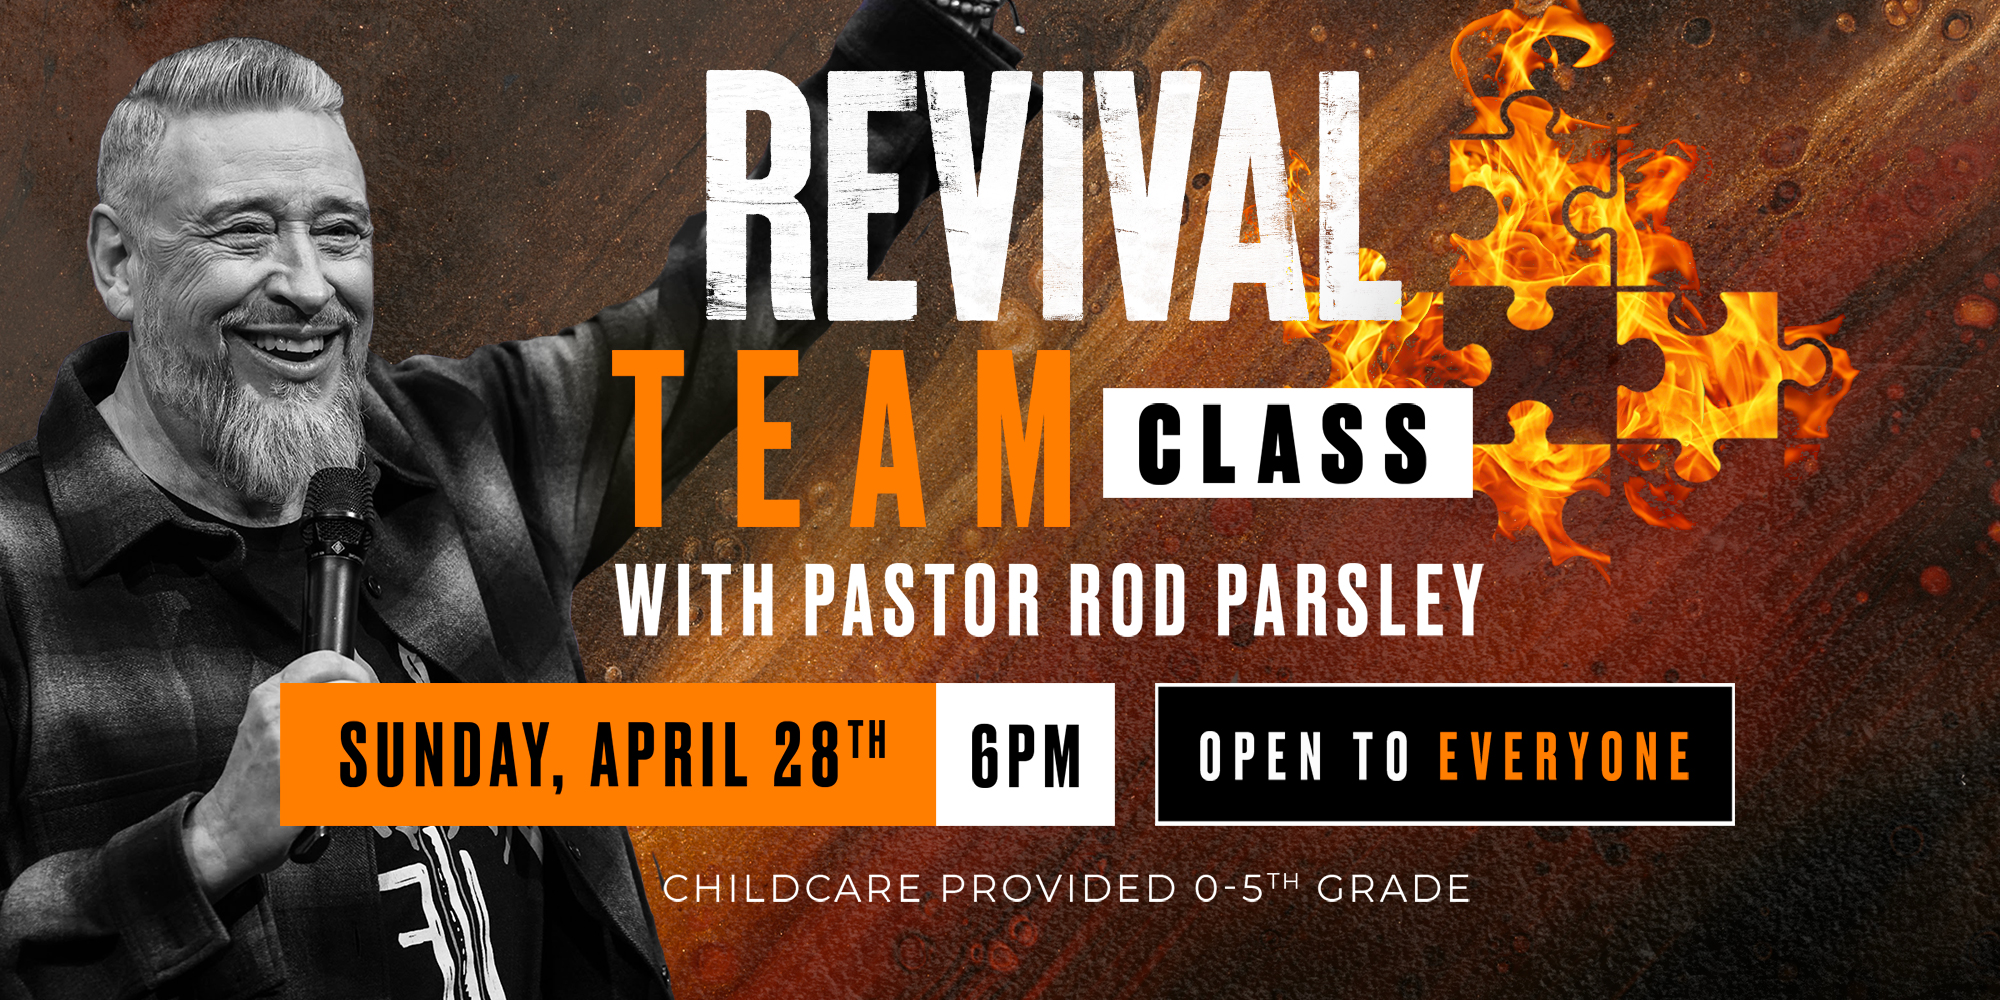 Revival Team Class with Pastor Rod Parsley Sunday, April 28th at 6pm Open to Everyone Childcare Provided 0-5th Grade